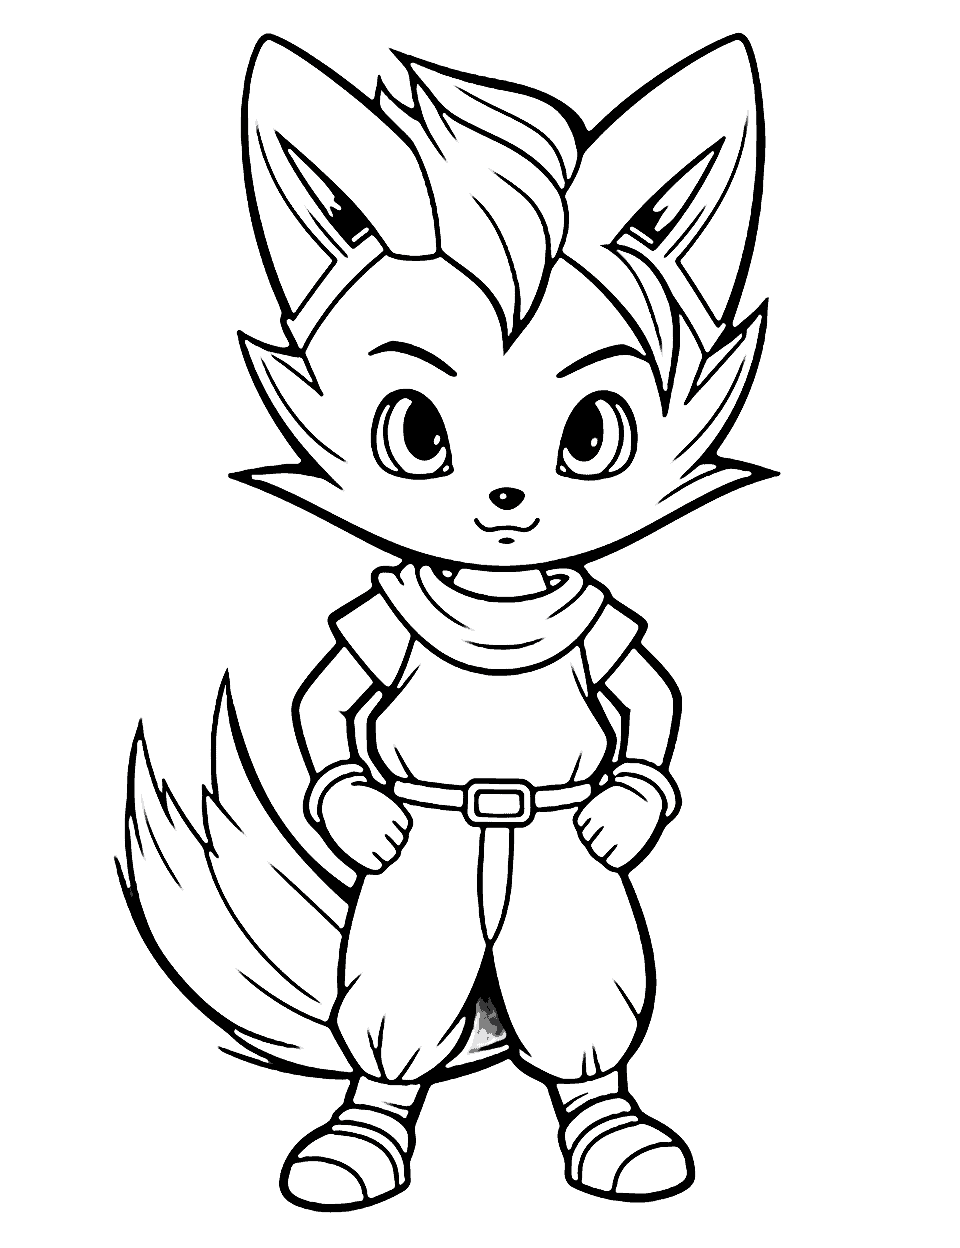 Cute Kawaii Fox Anime Coloring Page - A cute fox with large, sparkly eyes.